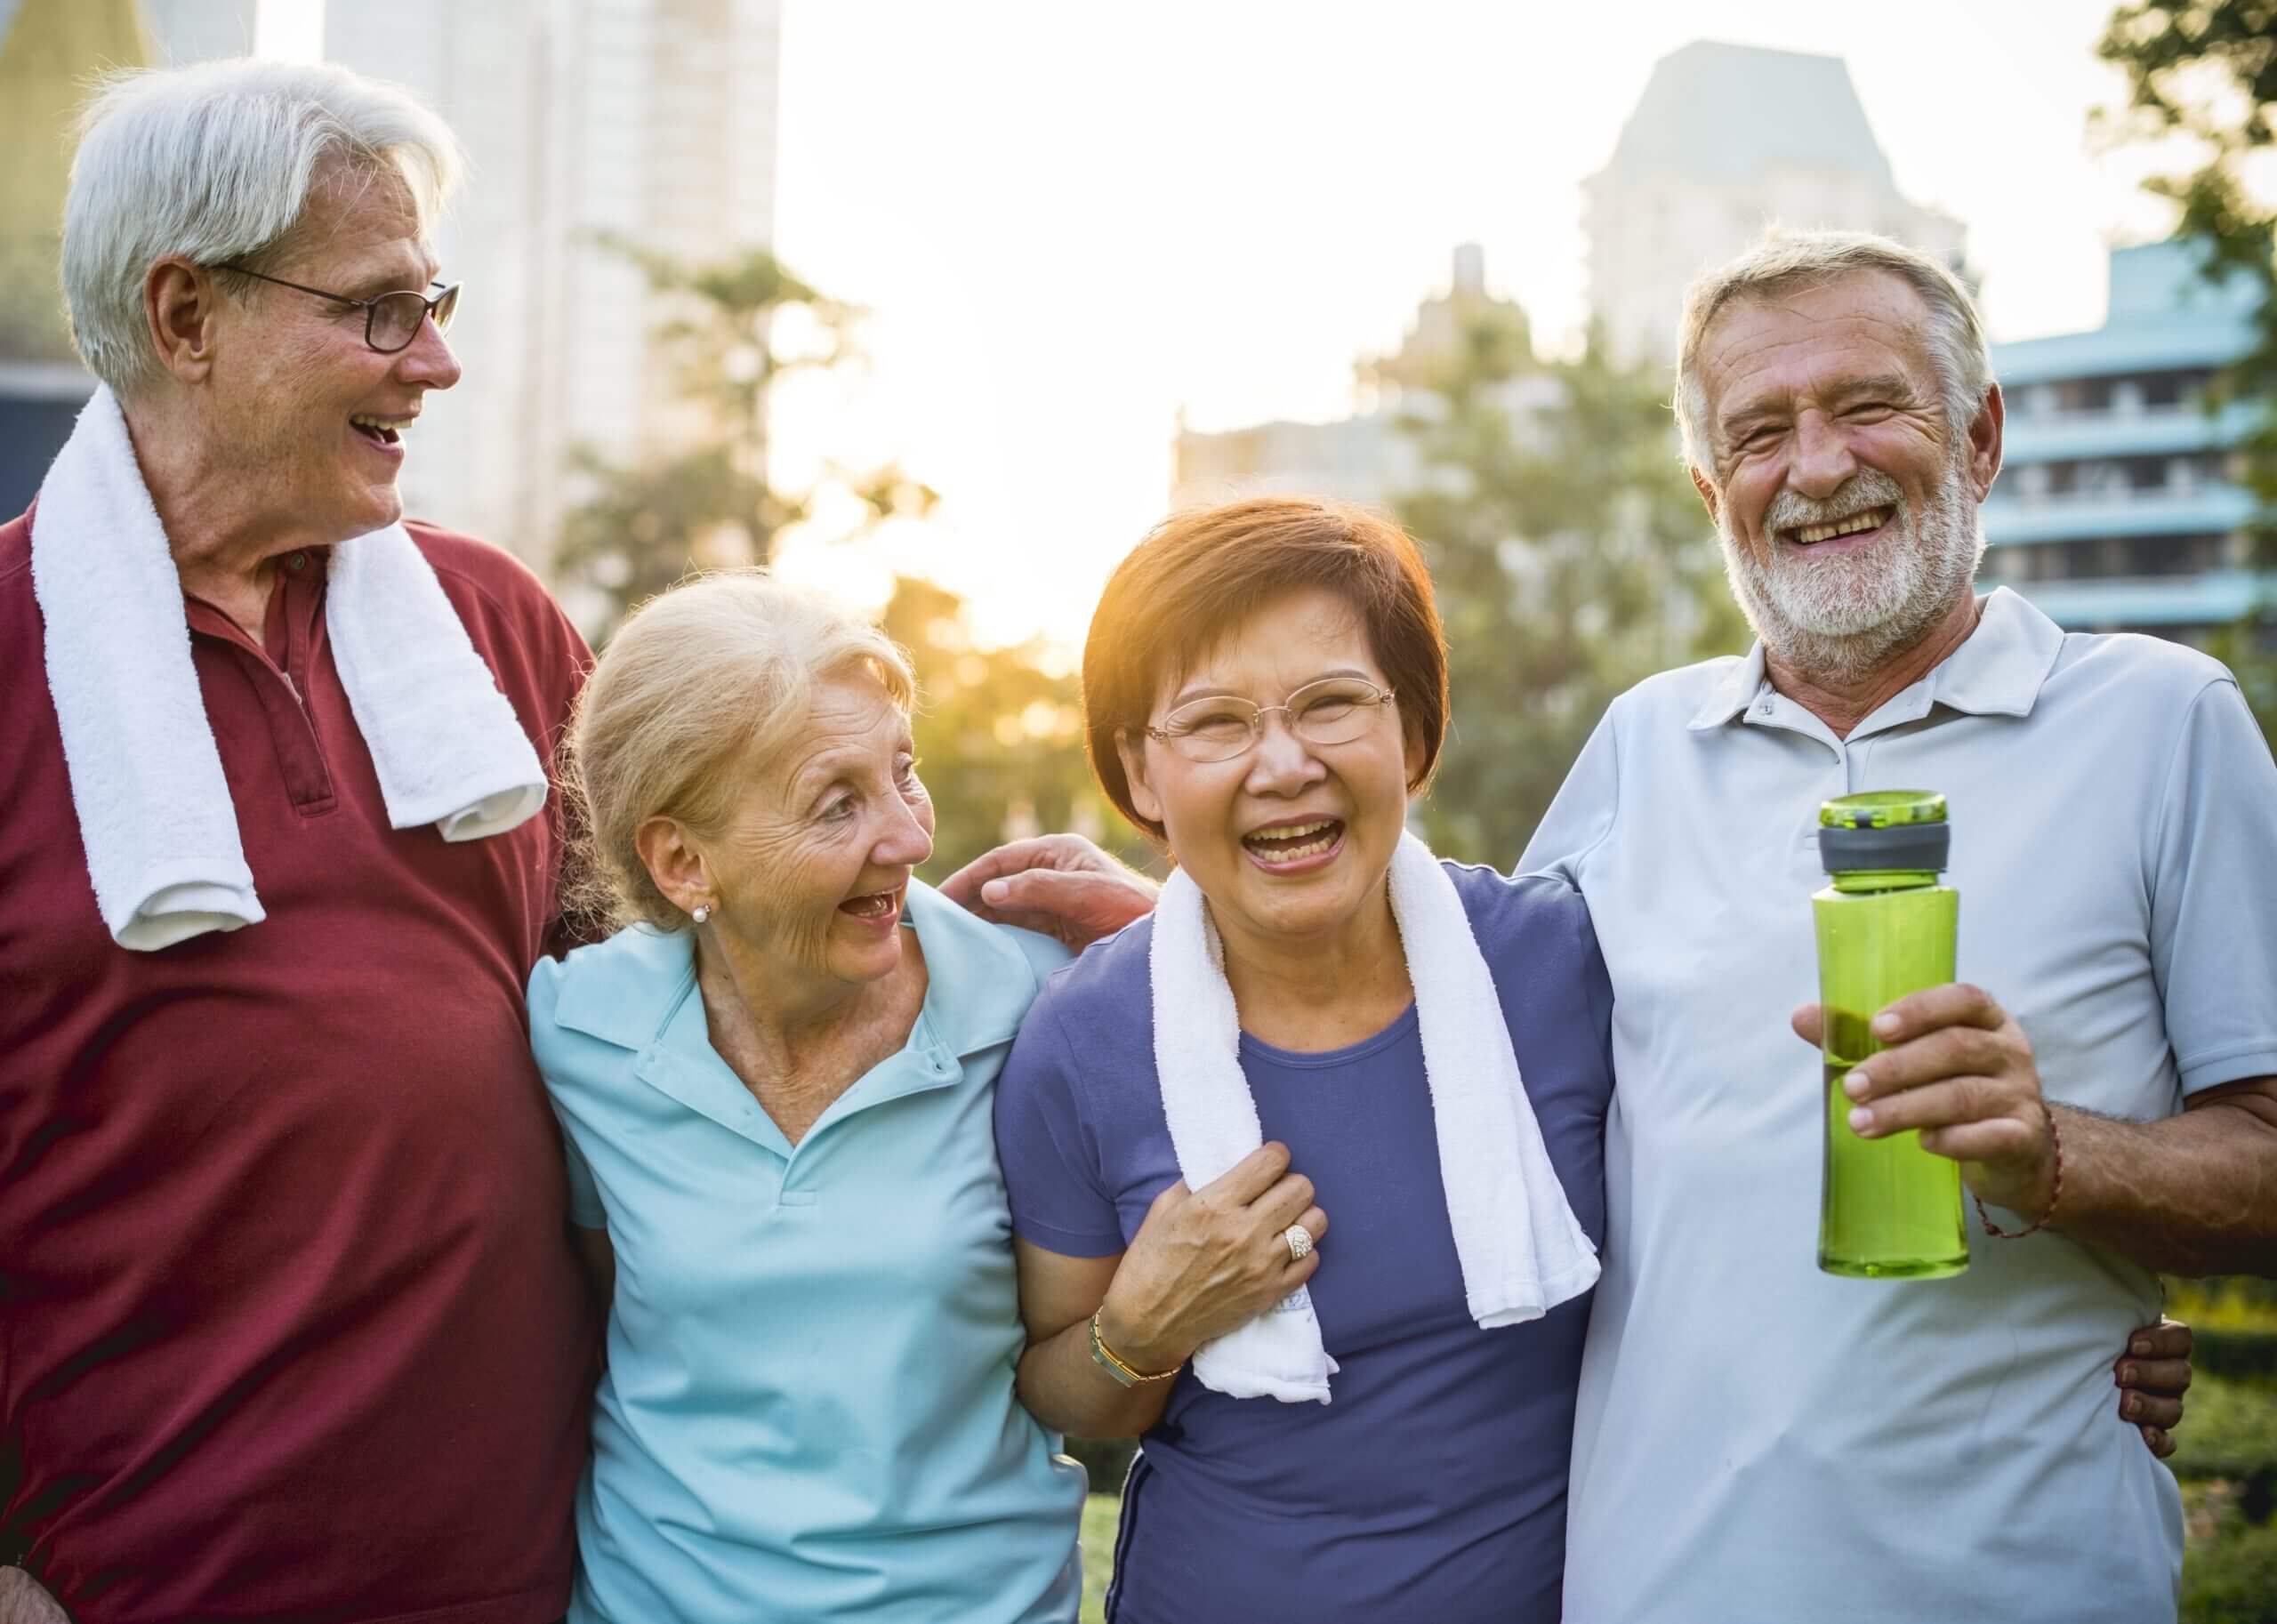 Group of diverse elderly exercise together